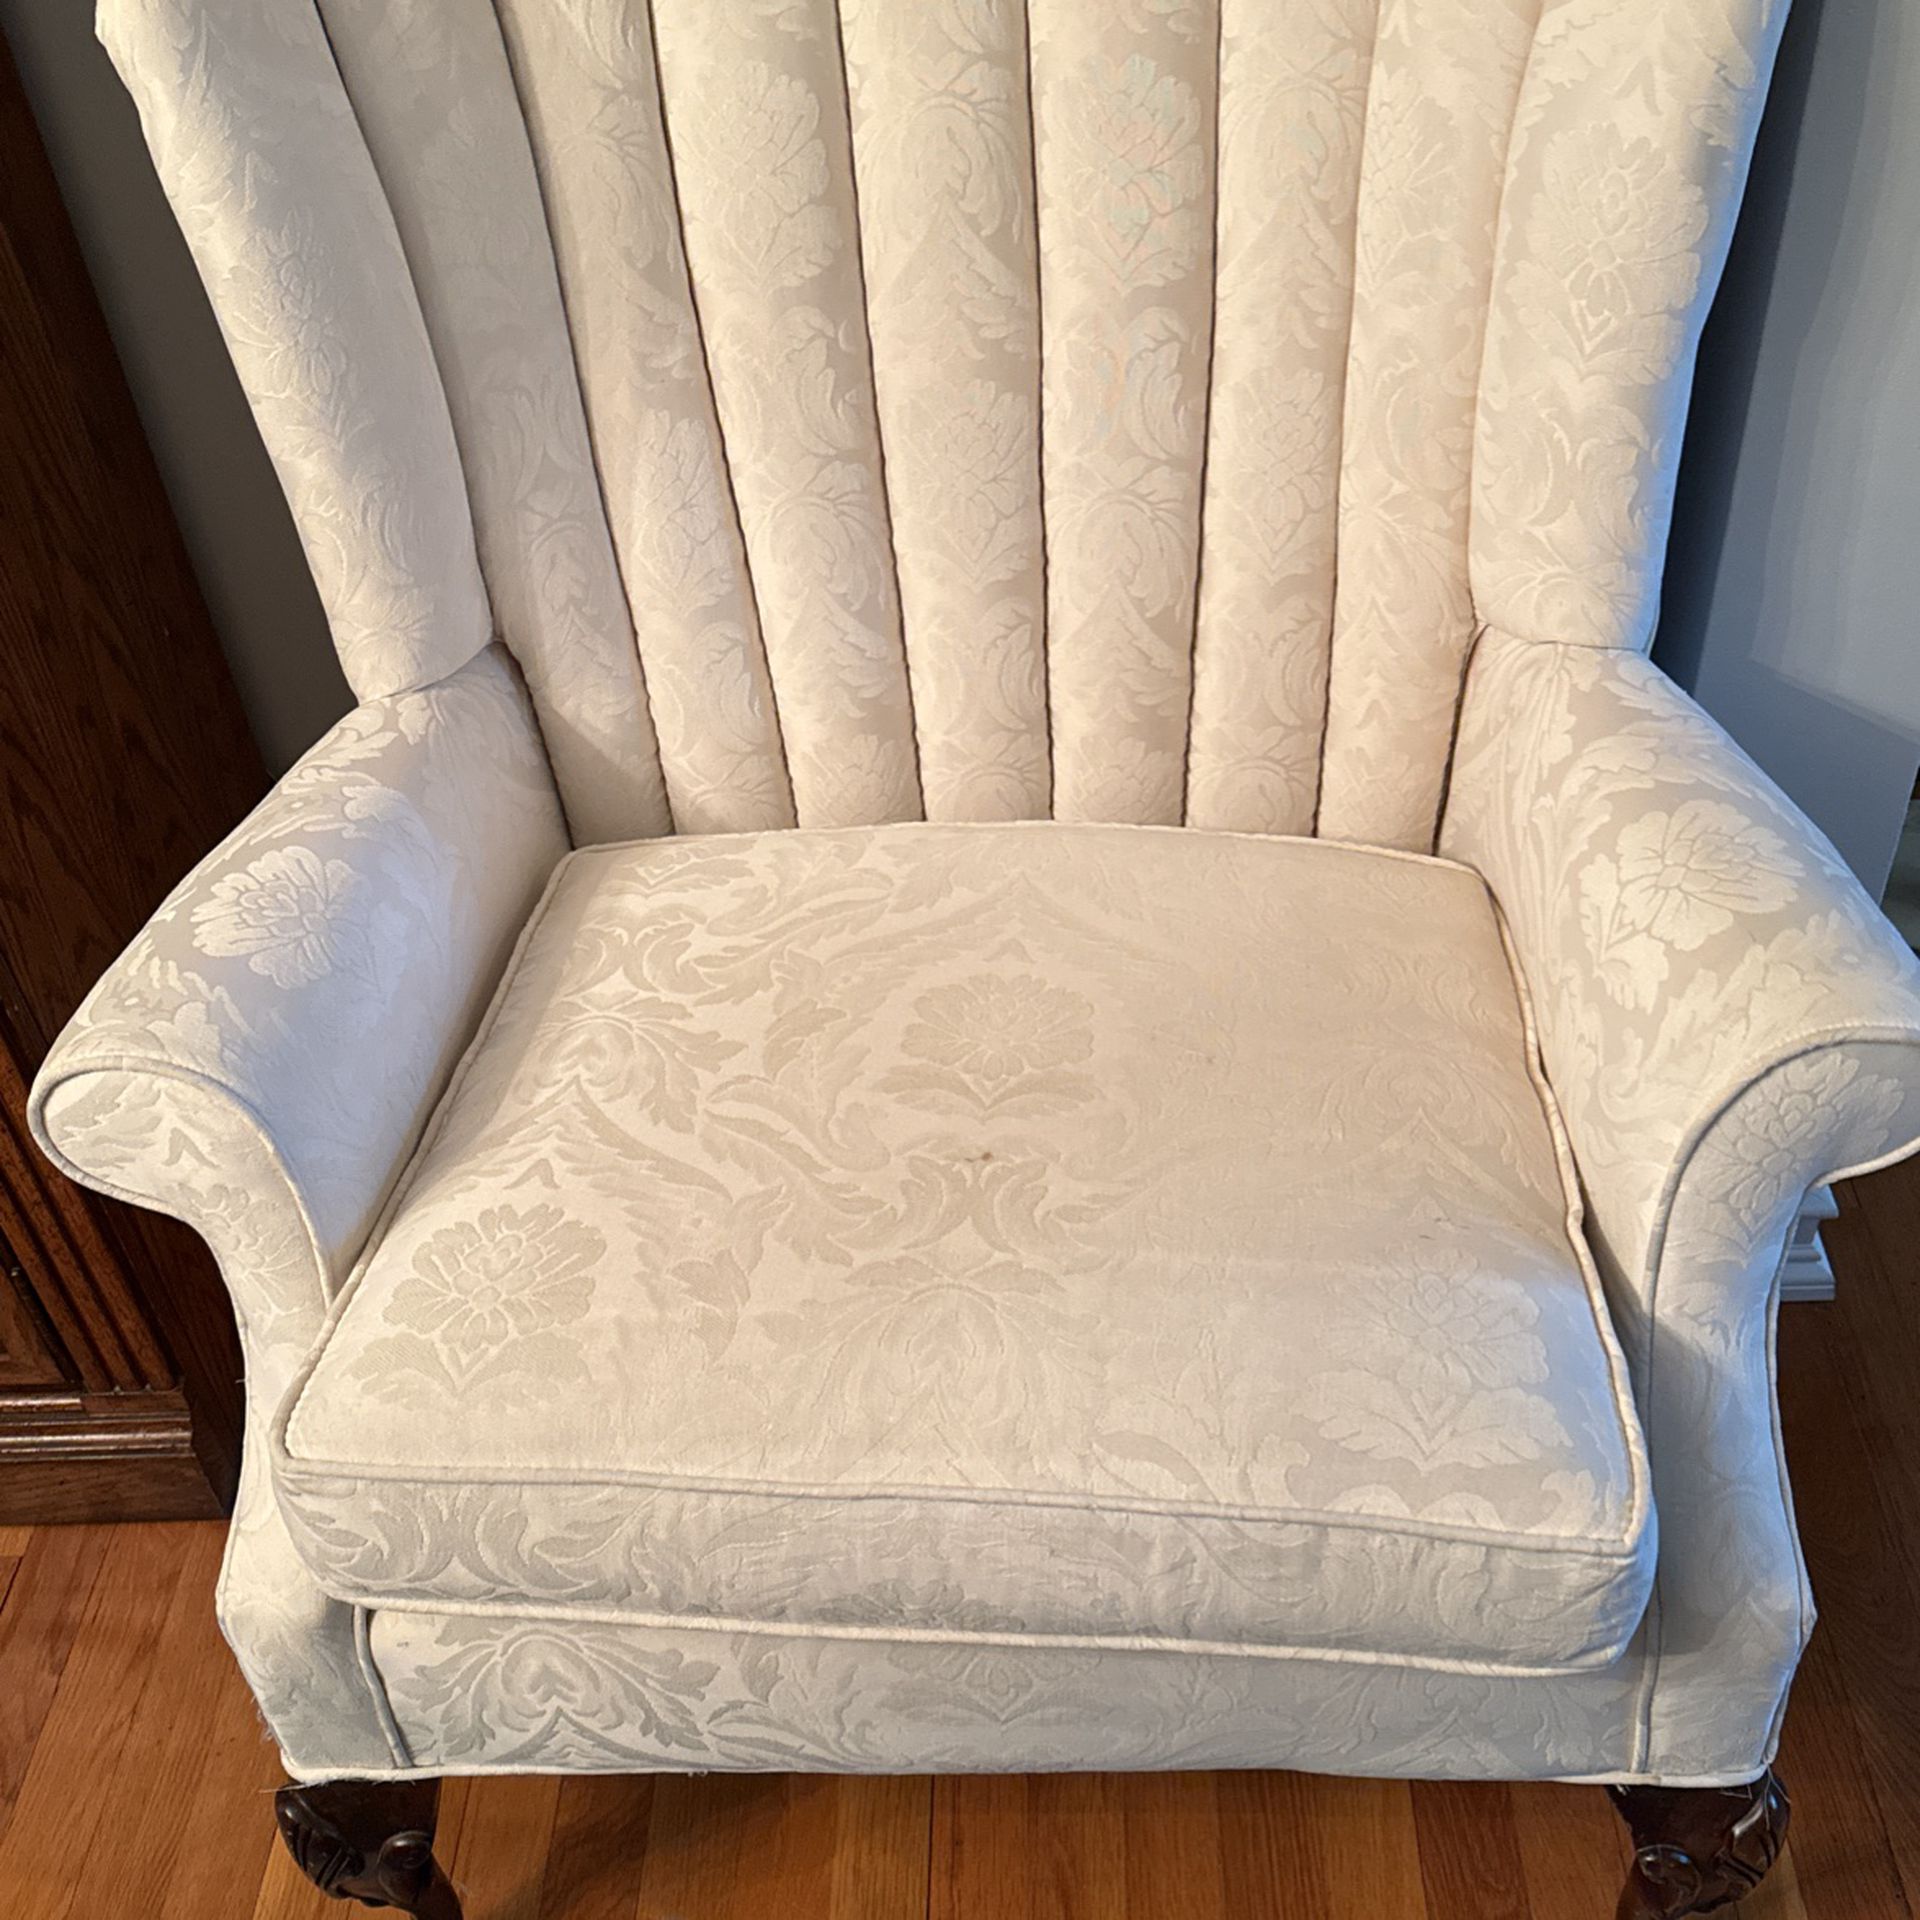 Luxury Arm Chairs Scotch Guarded. Mint Condition 150 Each